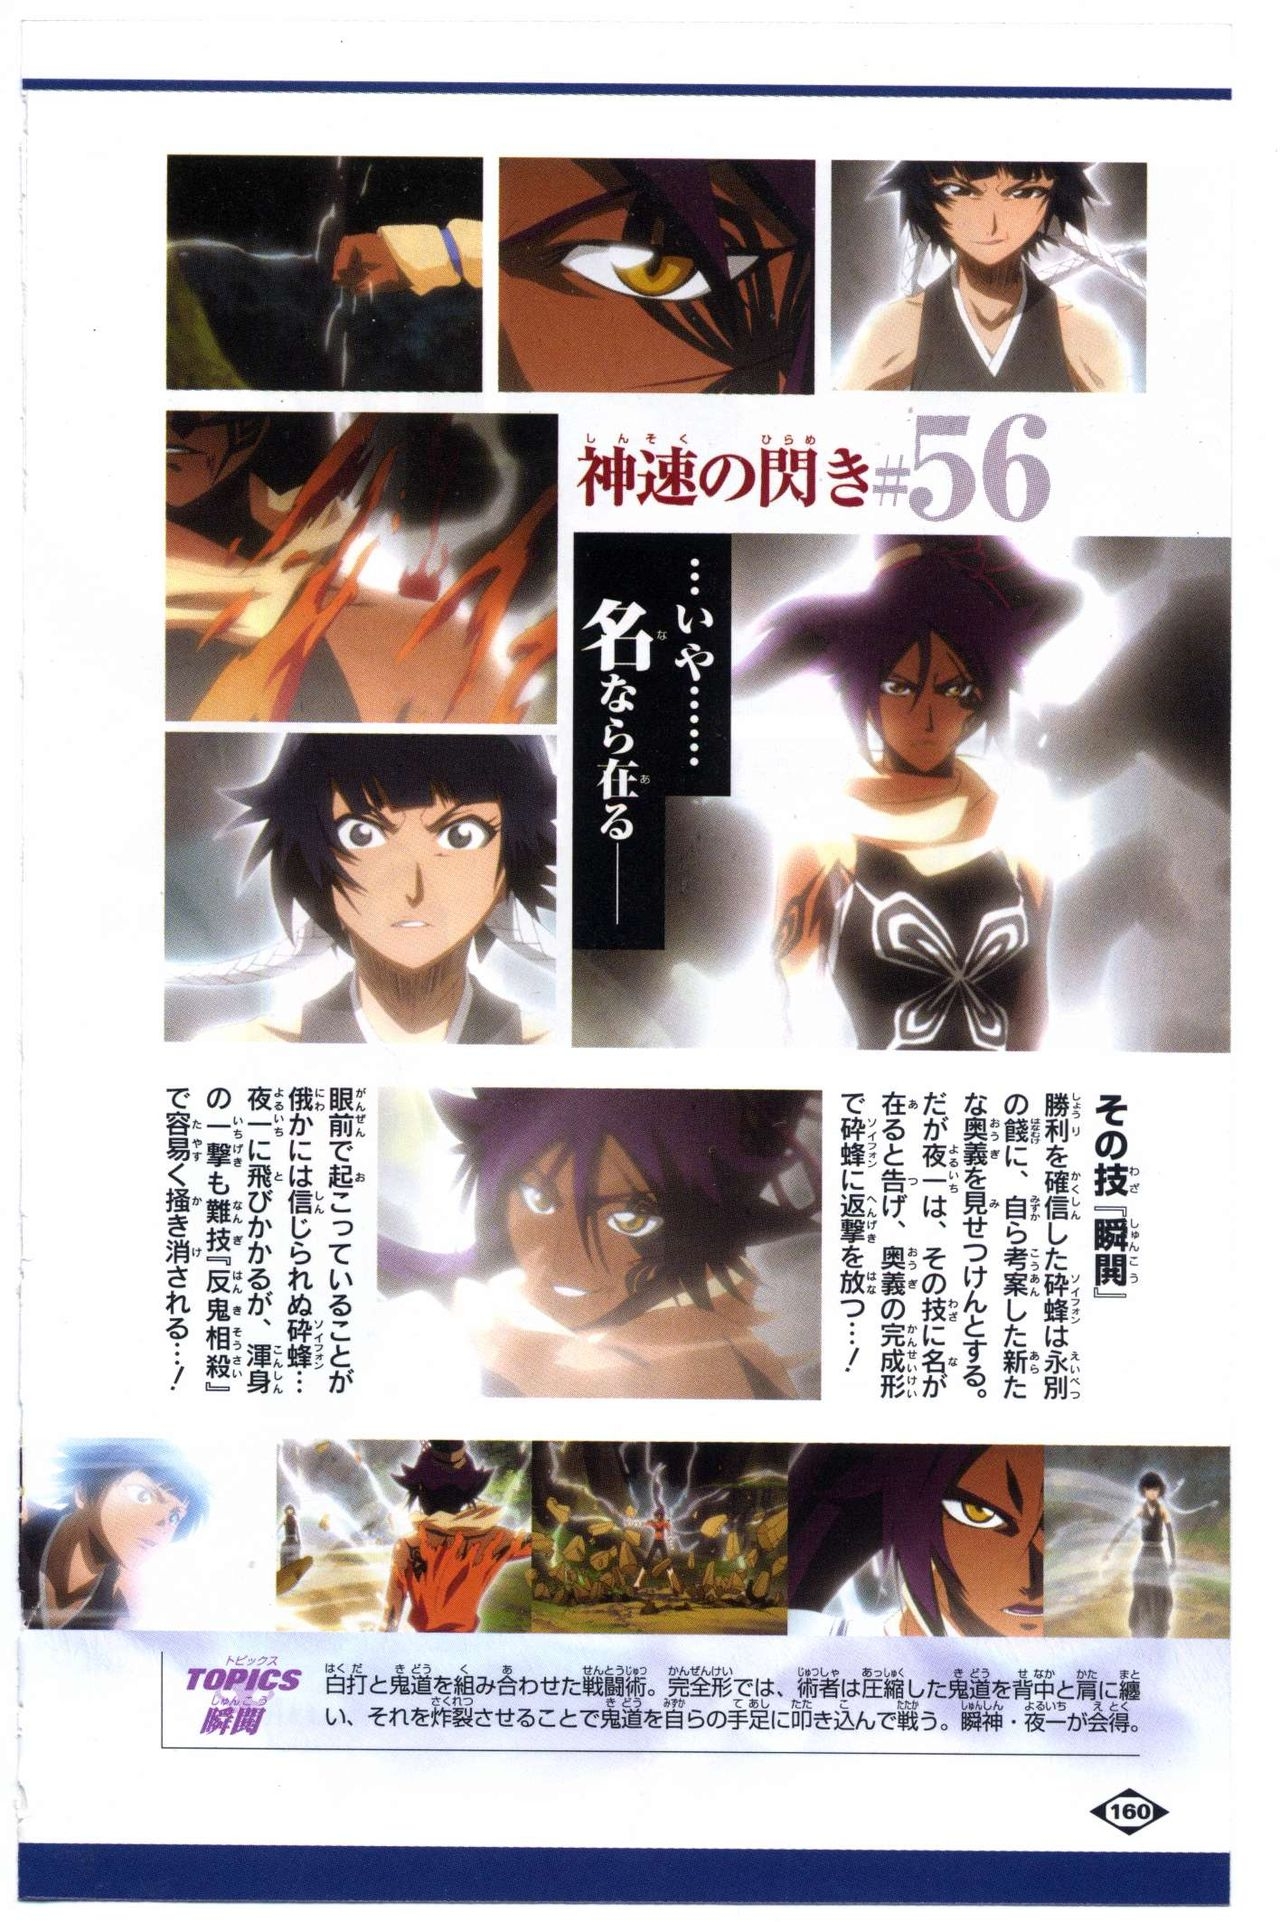 Bleach: Official Animation Book VIBEs 160